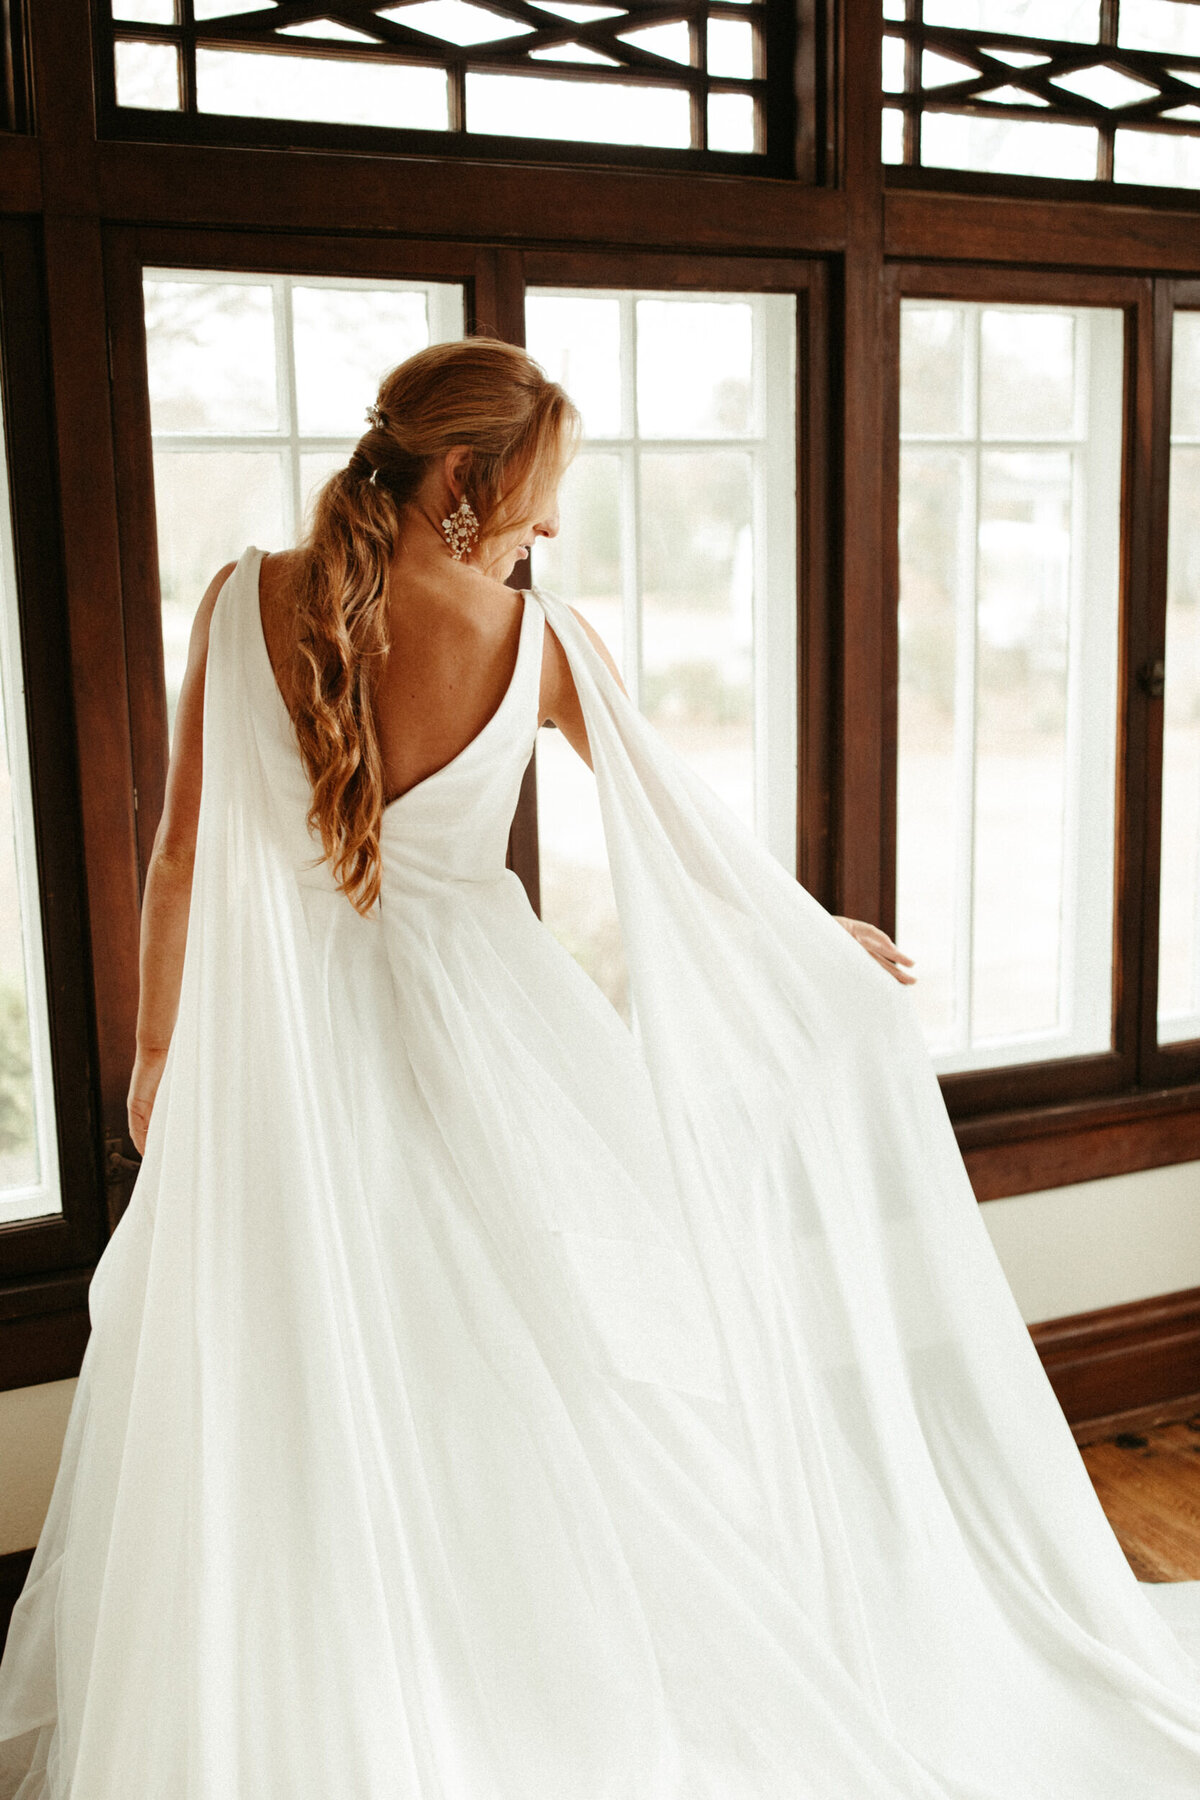 Bride with ponytail hairstyle waving her shoulder capes on her wedding dress